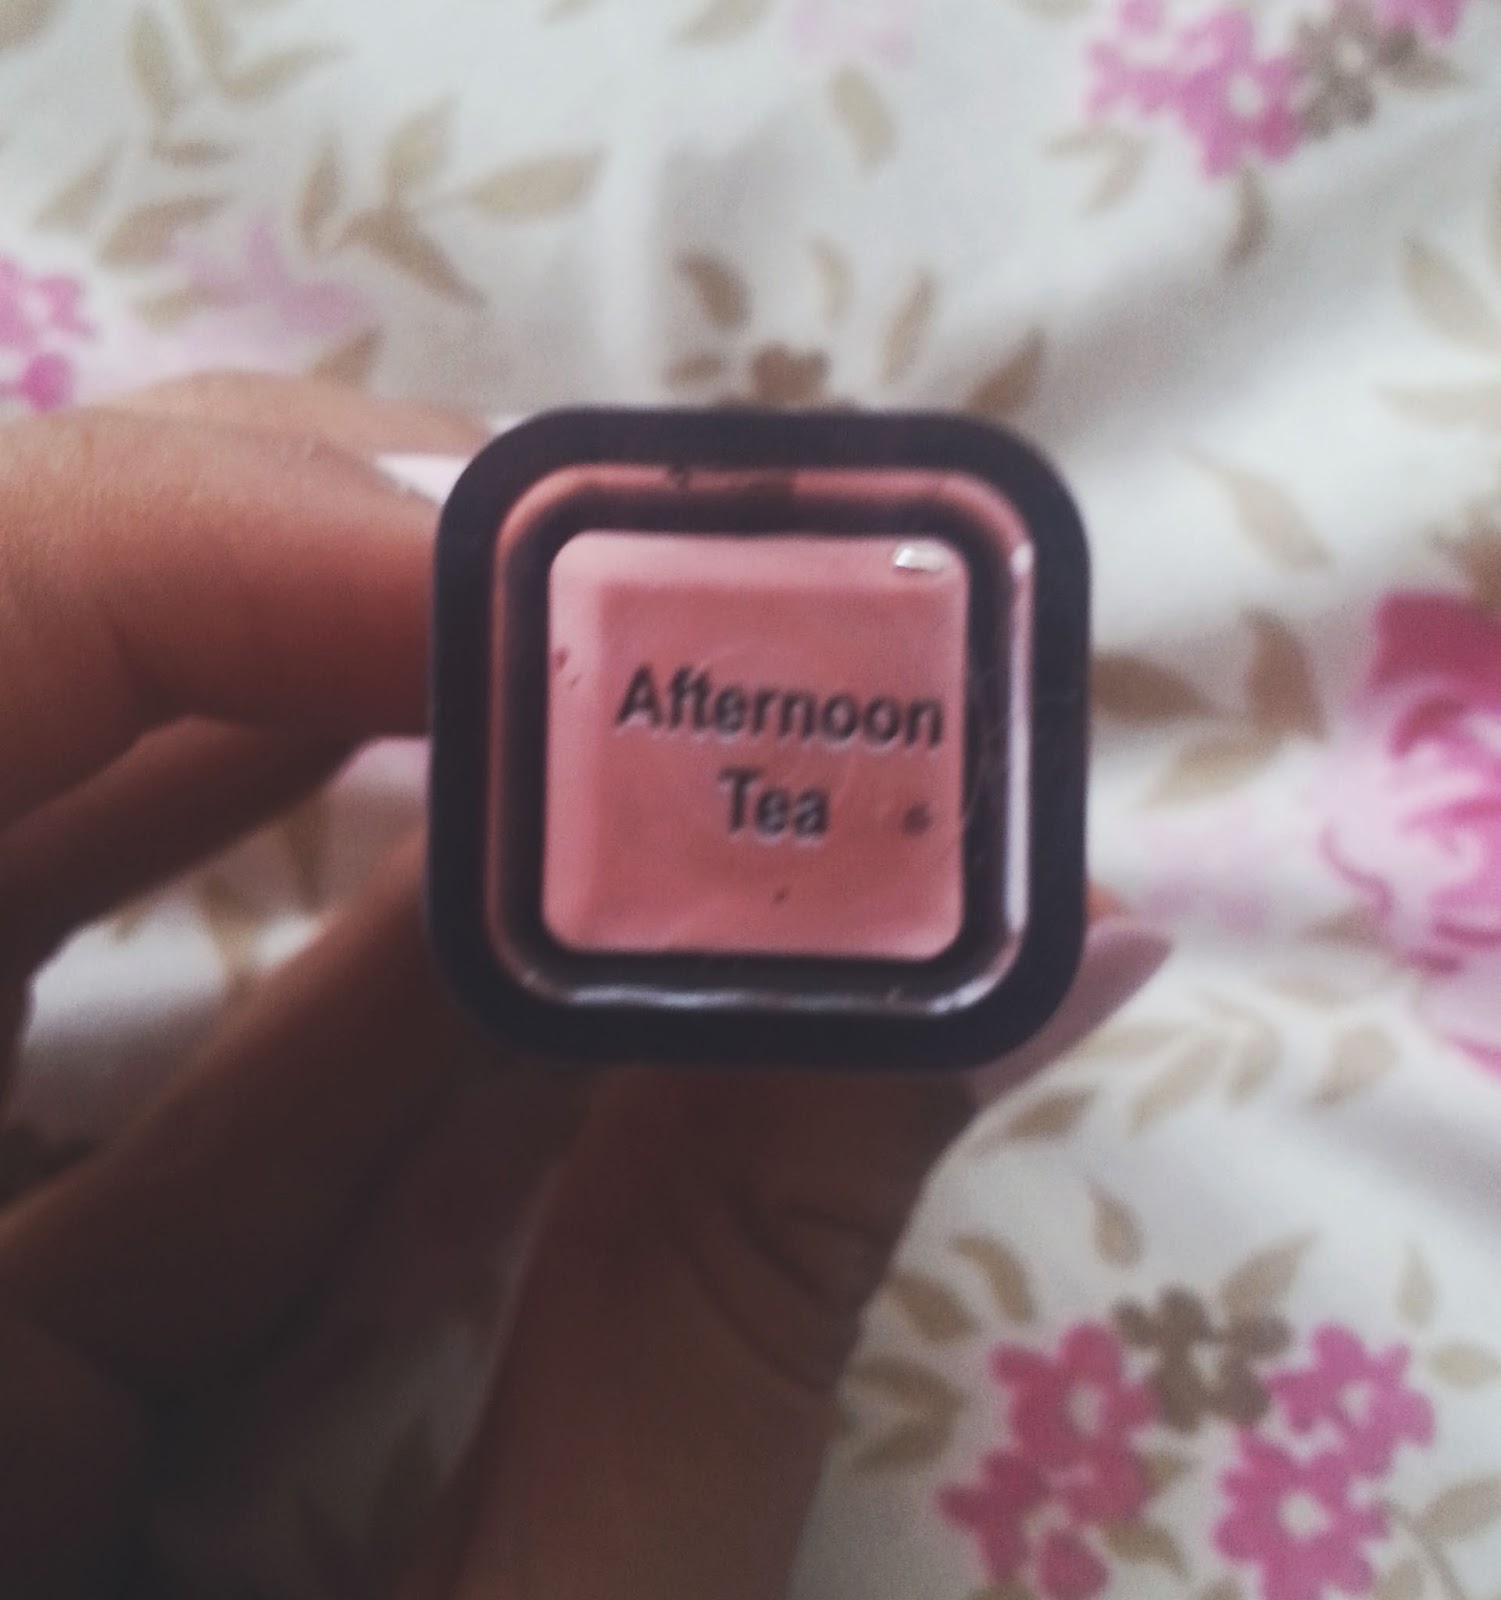 Tanya Burr Lipgloss in Afternoon Tea